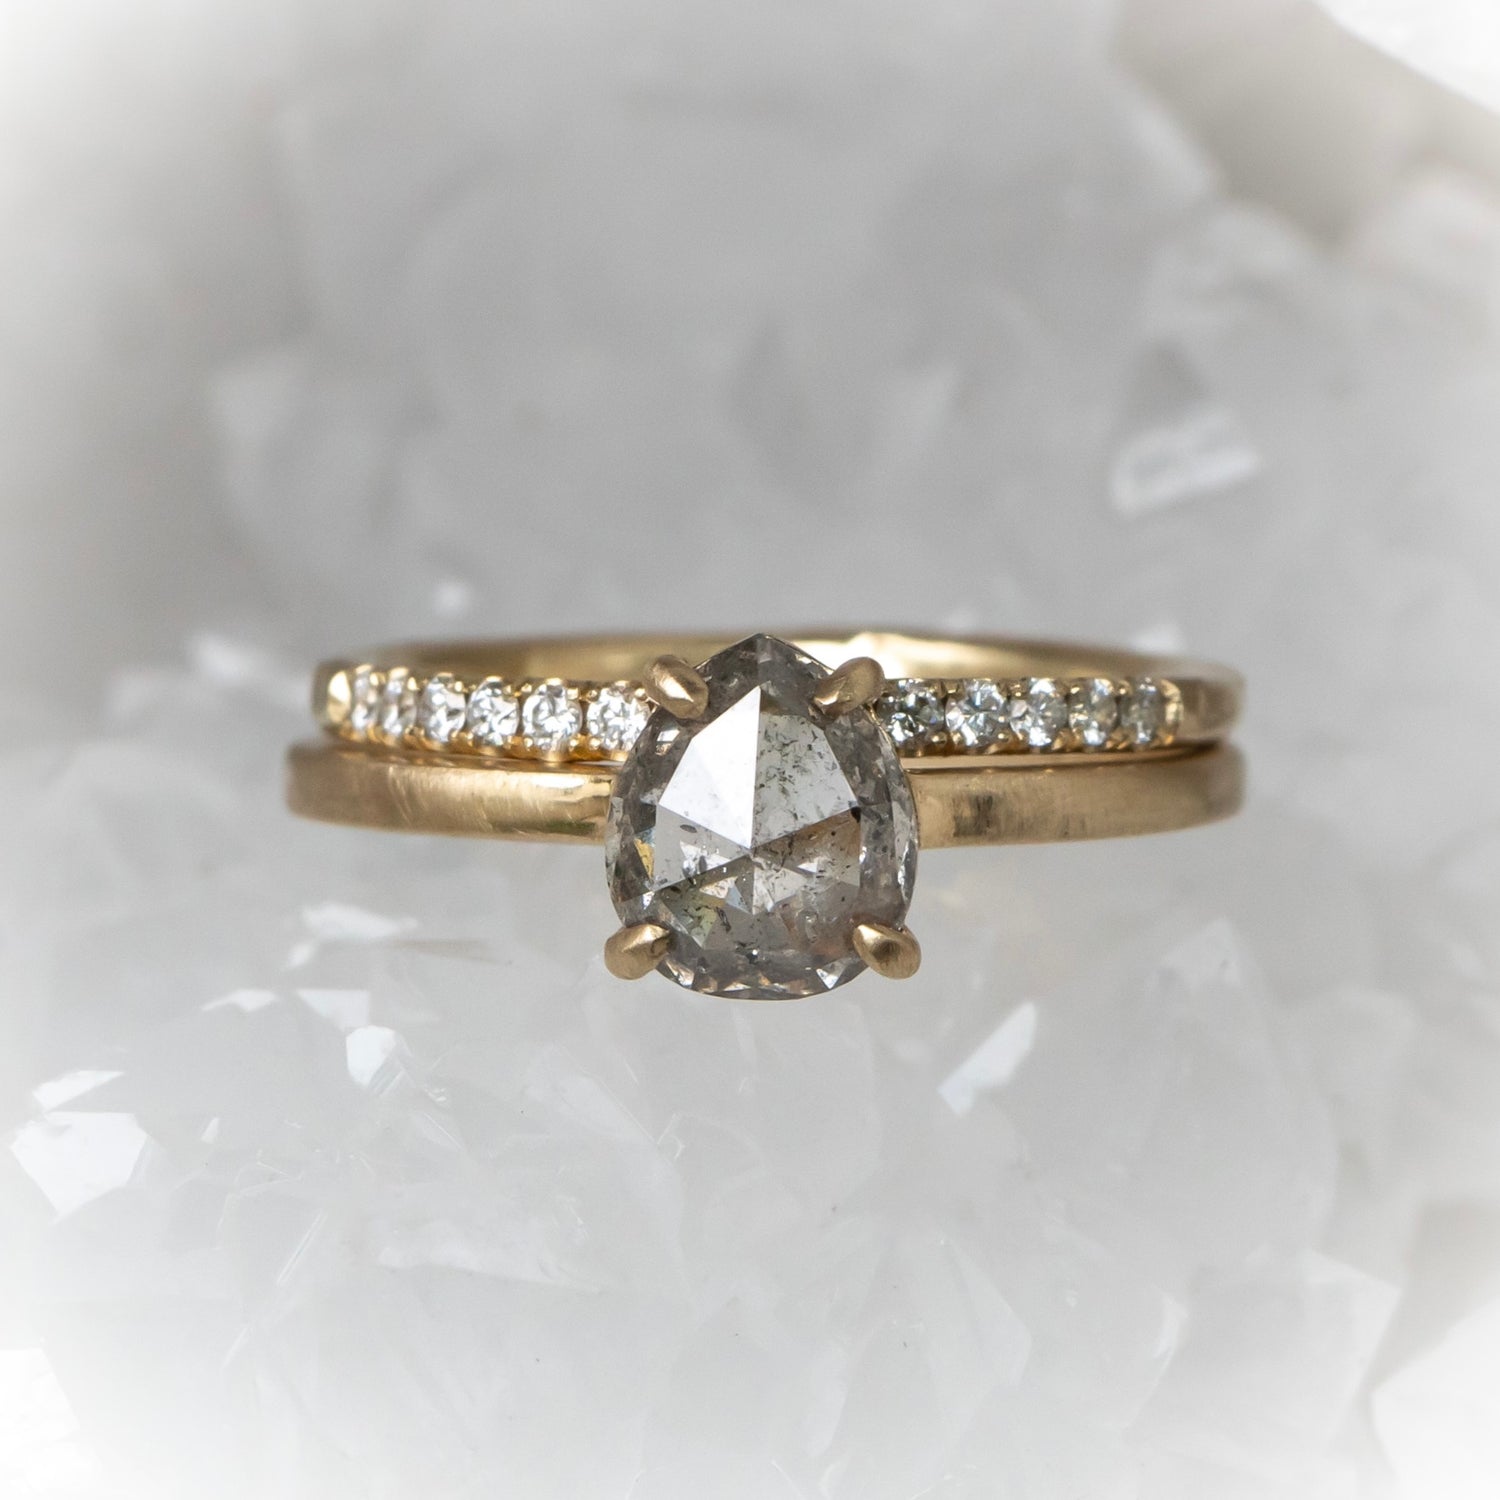 Ready to to ship: Salt and Pepper Pear Diamond Ring